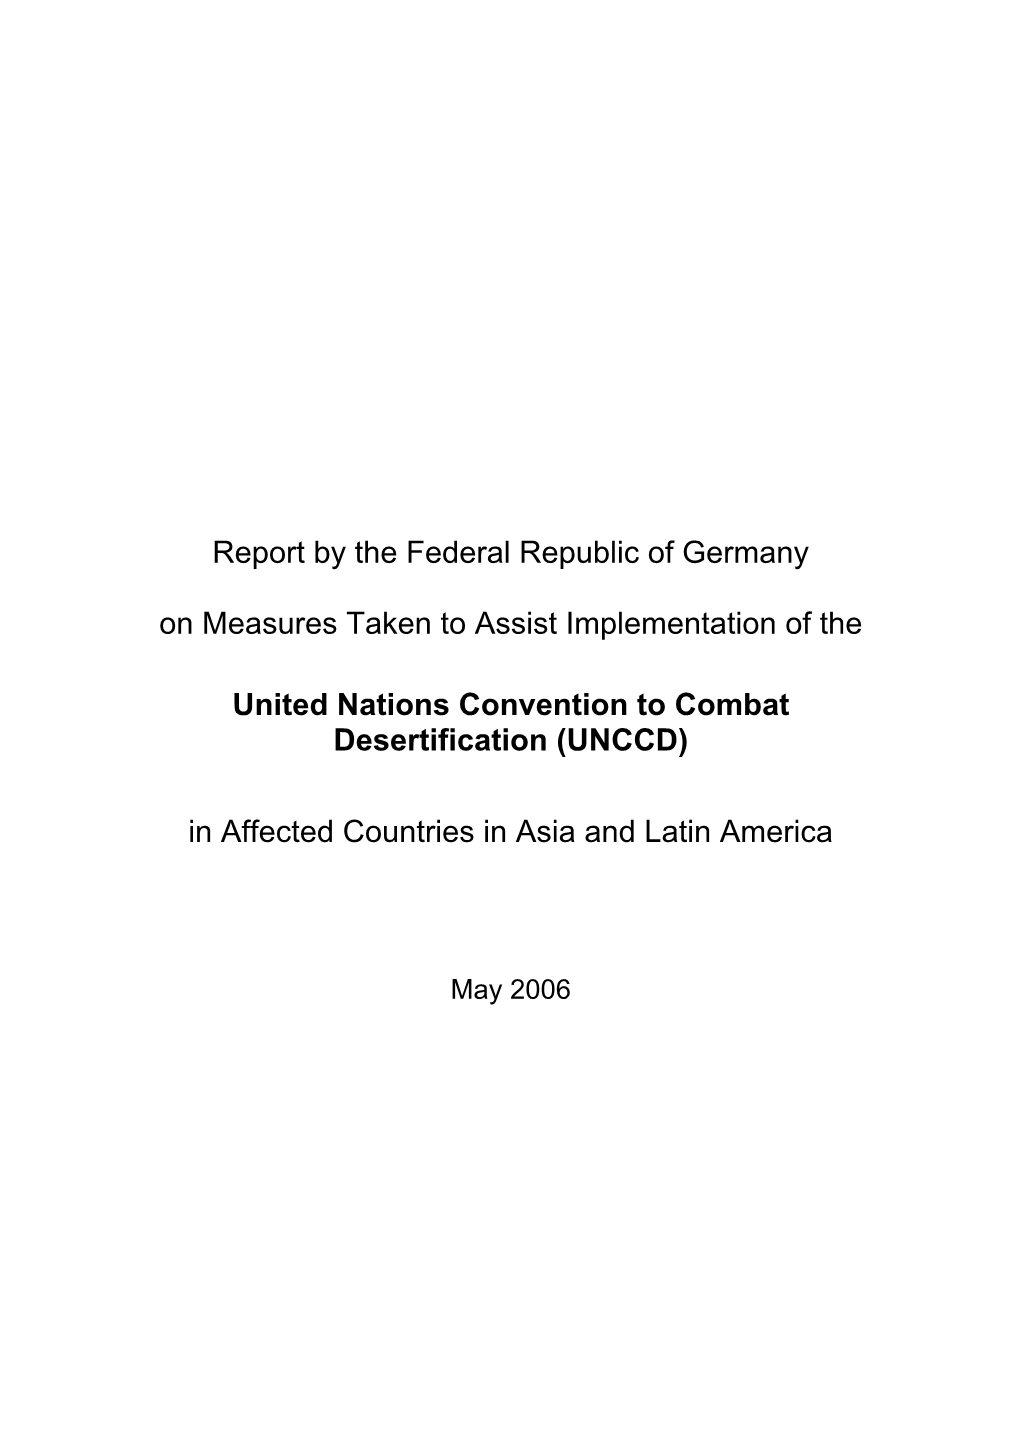 Report by the Federal Republic of Germany on Measures Taken to Assist Implementation of The